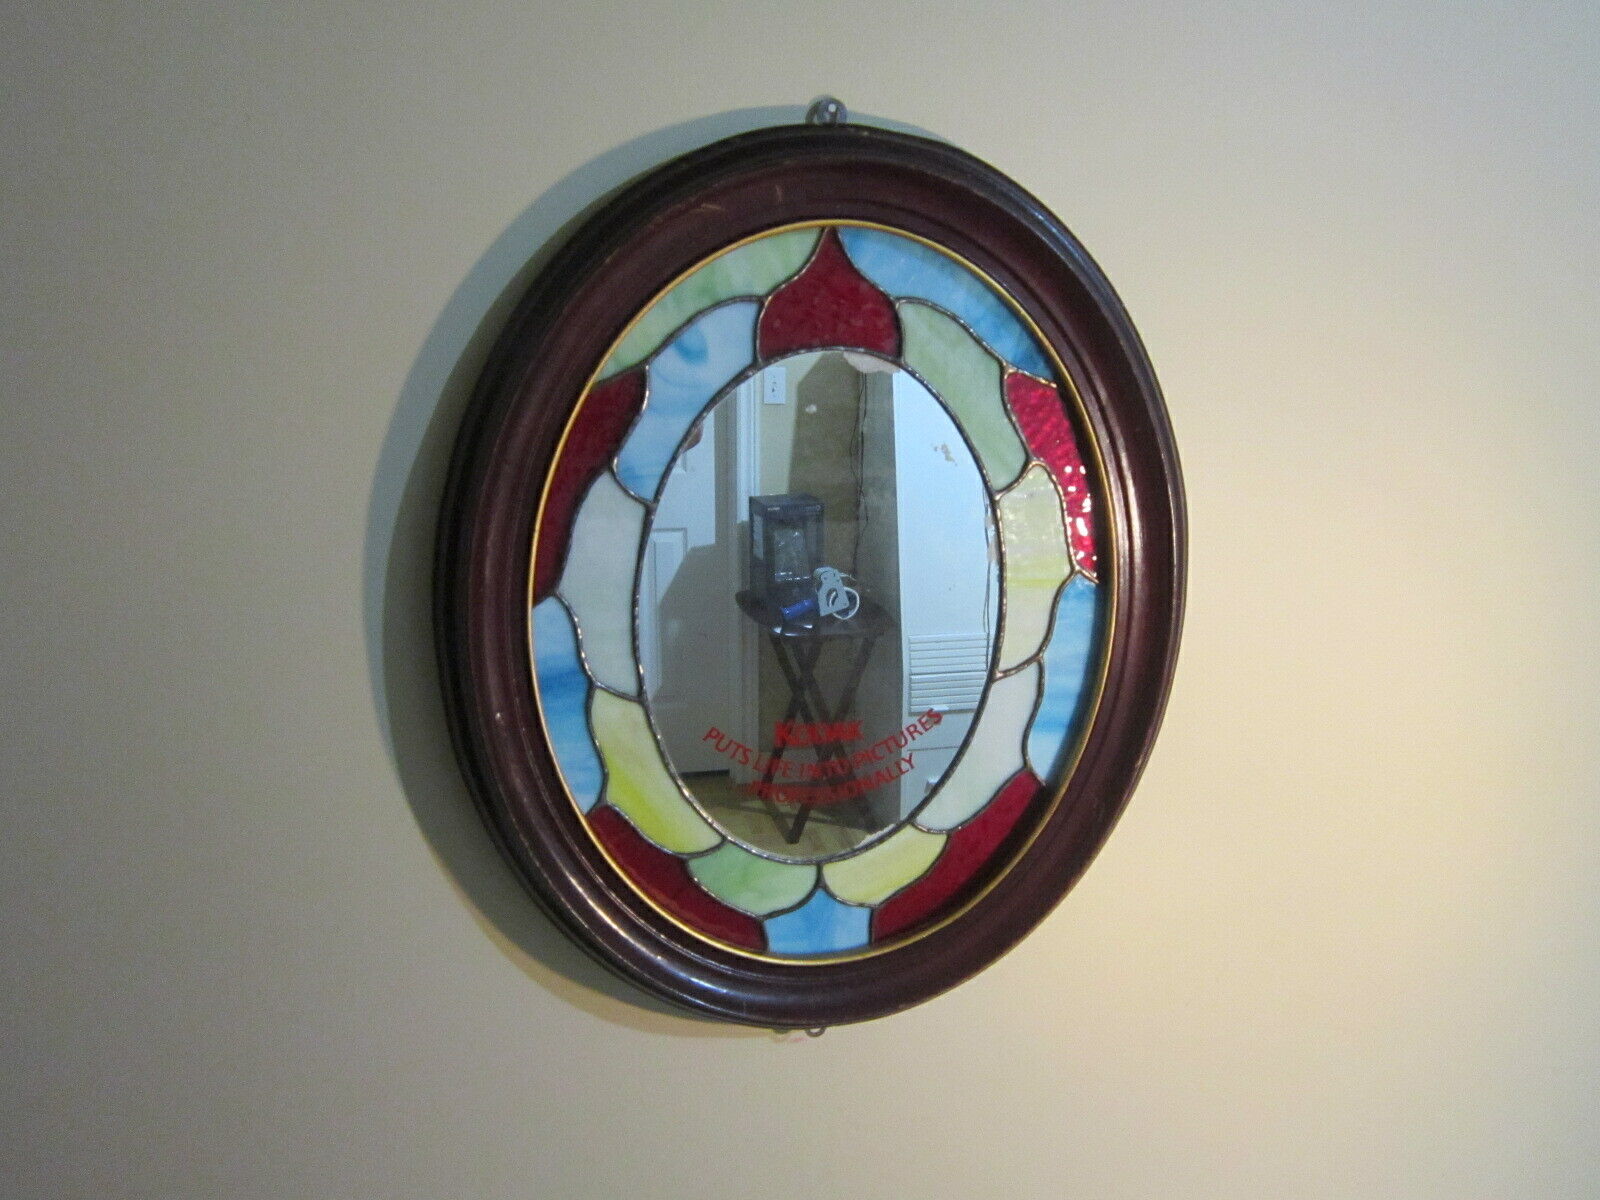 VERY RARE ORIGINAL VINTAGE KODAK STORE DISPLAY MIRROR WITH STAINED GLASS SIGN